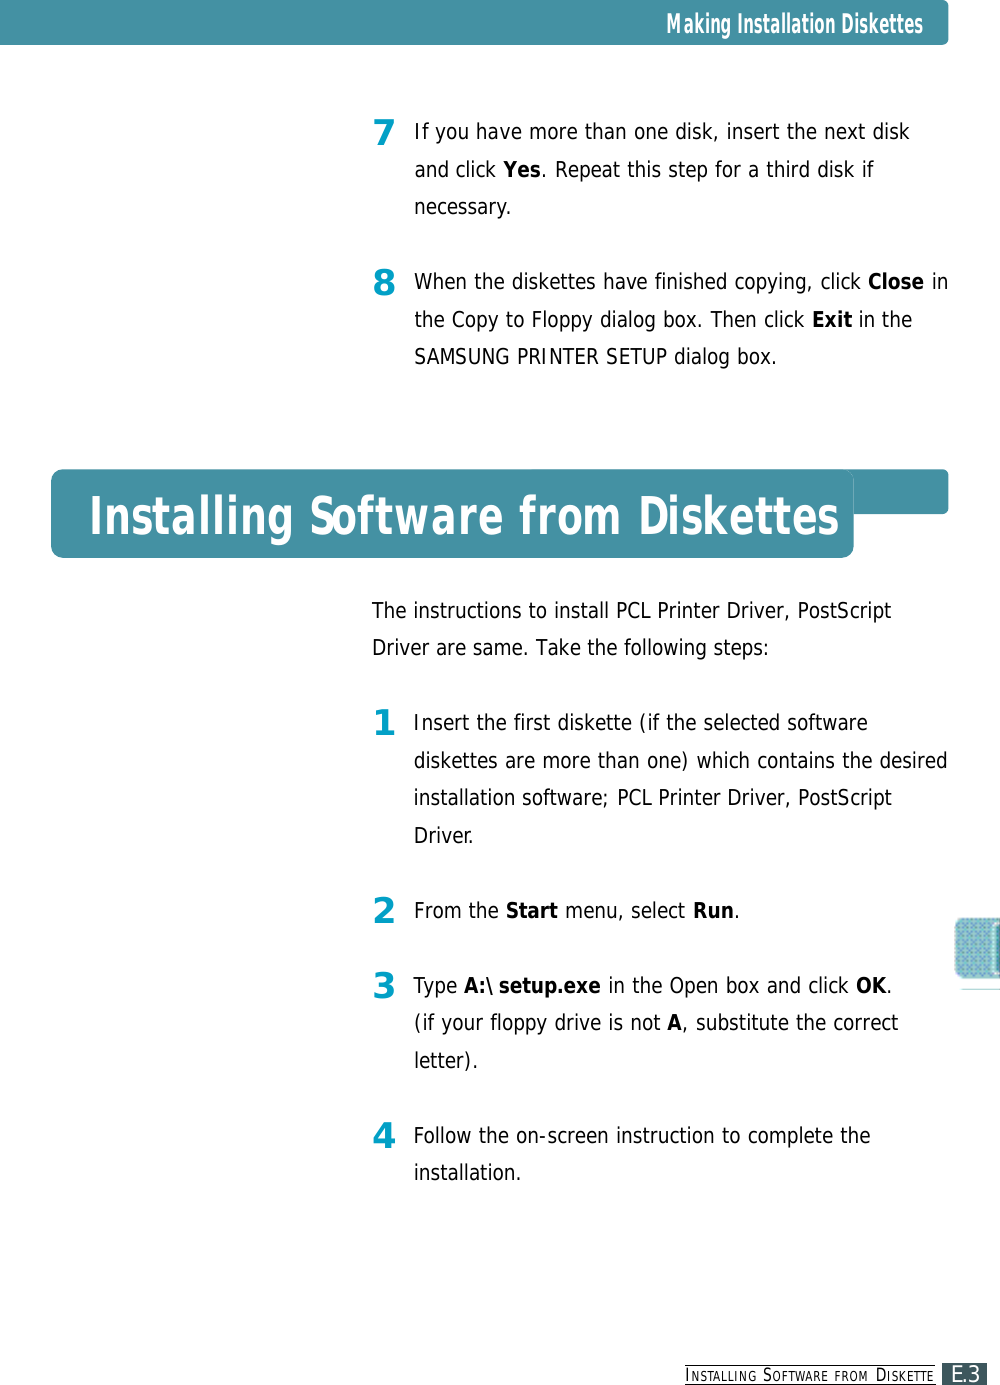 The instructions to install PCL Printer Driver, PostScriptDriver are same. Take the following steps:1Insert the first diskette (if the selected softwarediskettes are more than one) which contains the desiredinstallation software; PCL Printer Driver, PostScriptDriver.2From the Start menu, select Run.3Type A:\setup.exe in the Open box and click OK.(if your floppy drive is not A, substitute the correctletter).4Follow the on-screen instruction to complete theinstallation.IN S TA L L I N G SO F T WA R E F R O M DI S K E T T EE.37If you have more than one disk, insert the next diskand click Yes. Repeat this step for a third disk ifnecessary.8When the diskettes have finished copying, click Close inthe Copy to Floppy dialog box. Then click Exit in theSAMSUNG PRINTER SETUP dialog box.Installing Software from DiskettesMaking Installation Diskettes